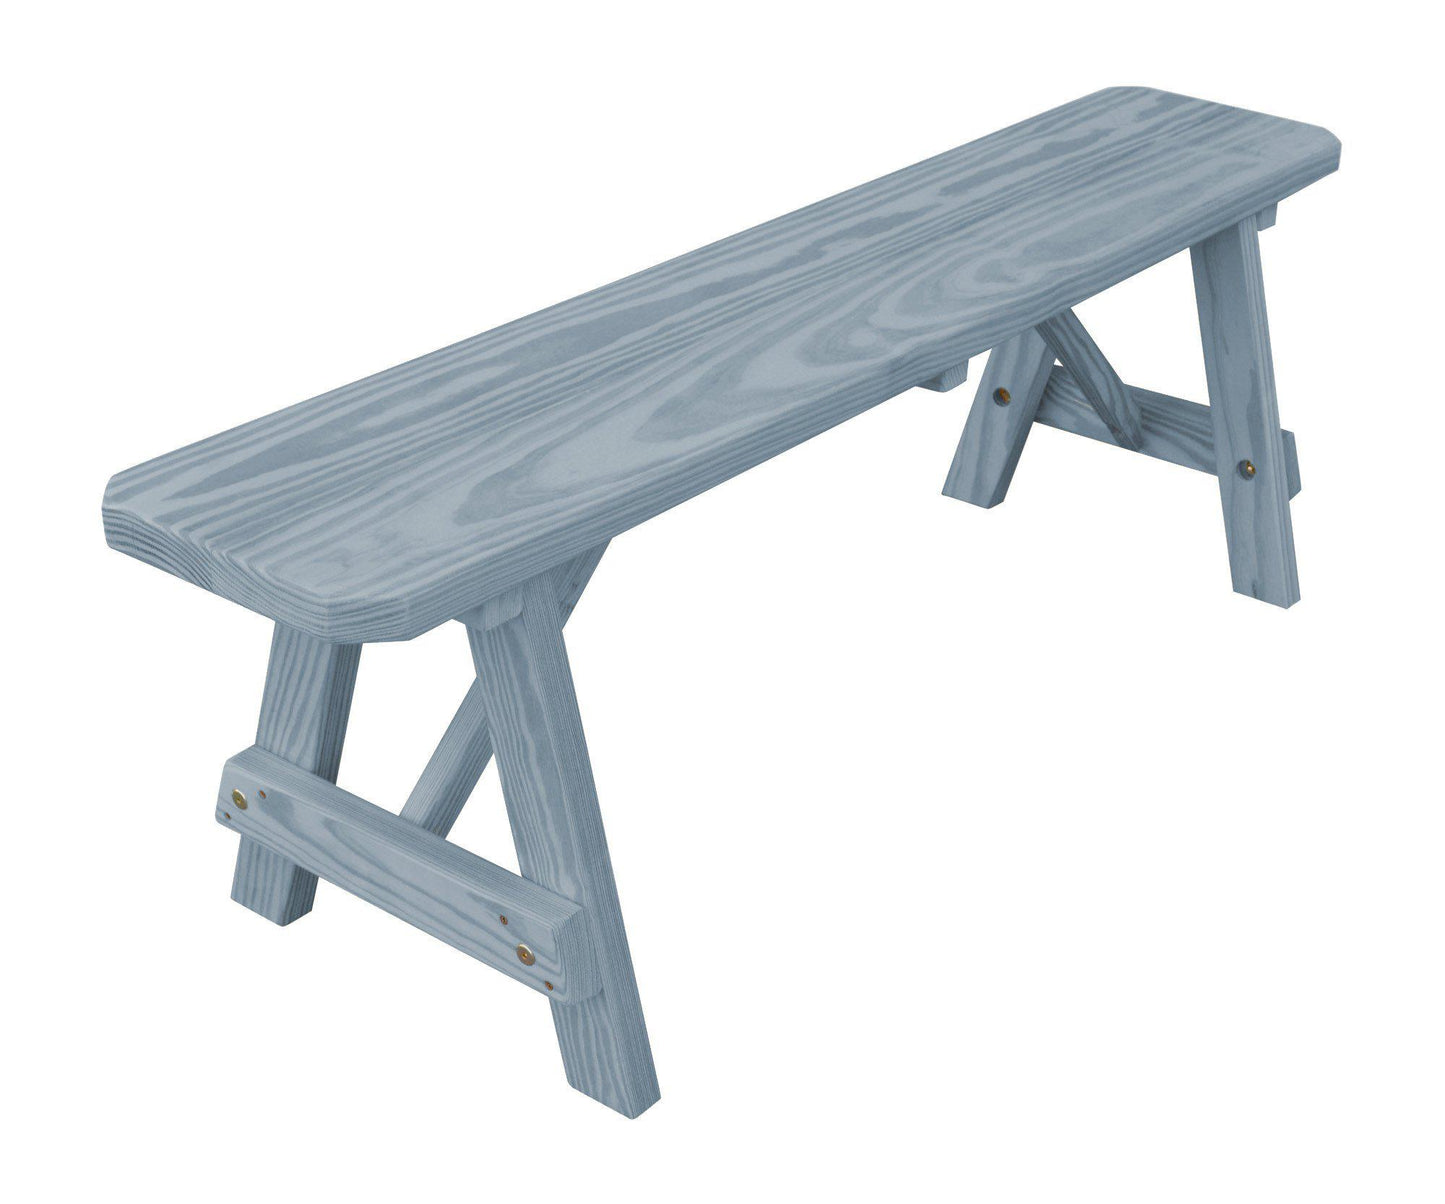 A&L Furniture Co. Yellow Pine 55" Traditional Bench Only - LEAD TIME TO SHIP 10 BUSINESS DAYS